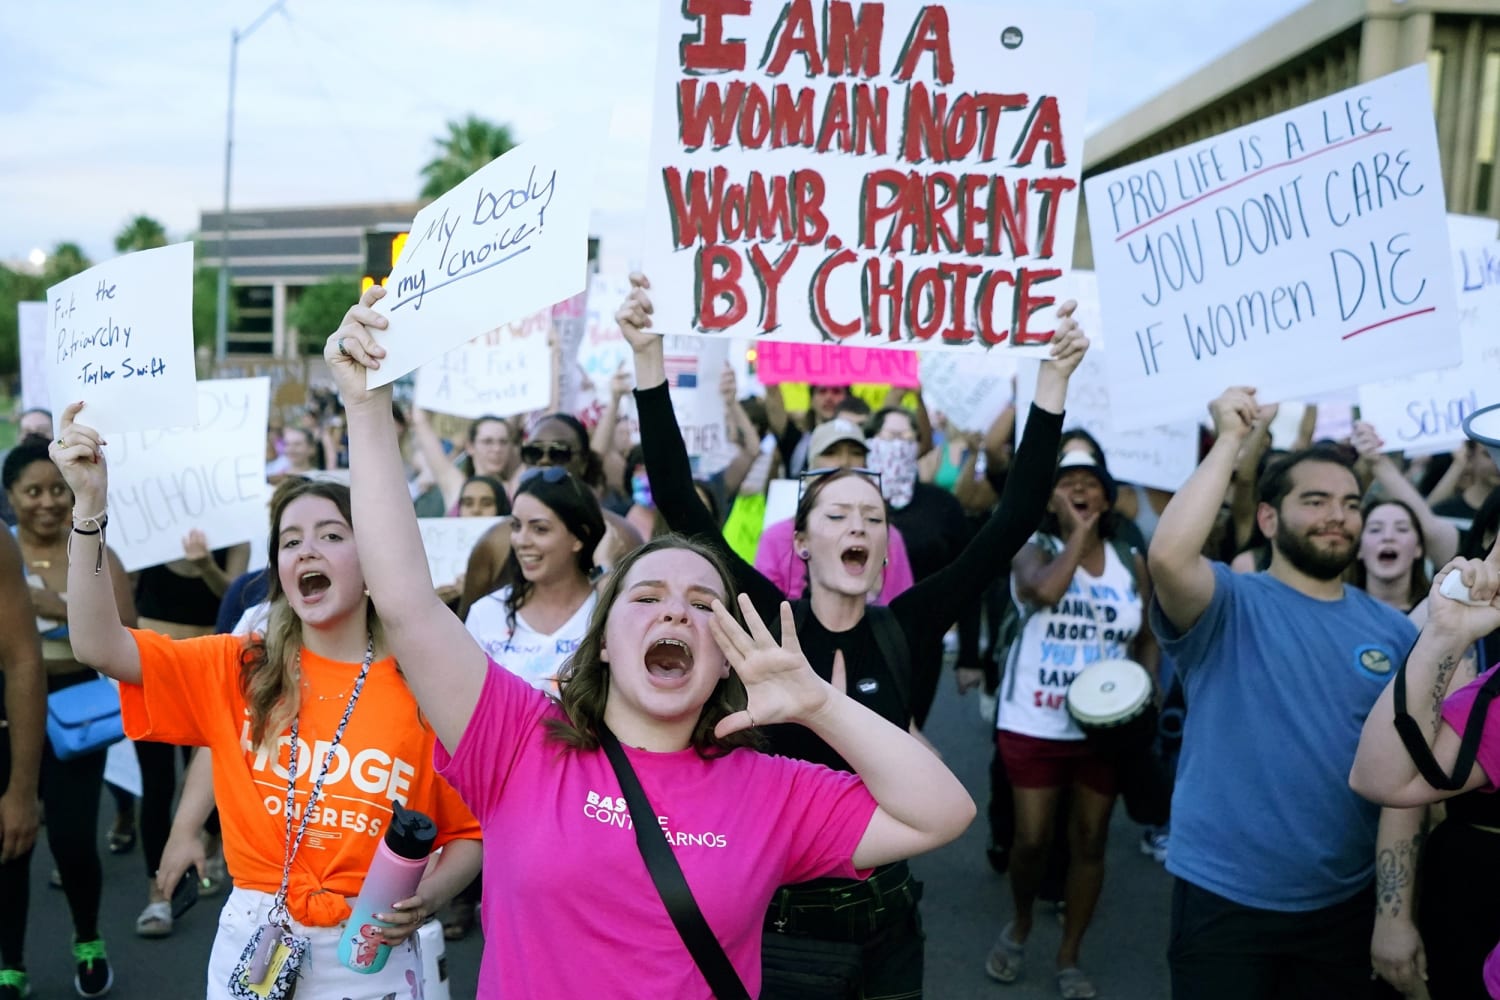 Federal judge blocks Arizona’s ‘personhood’ abortion law, which gives legal rights to unborn